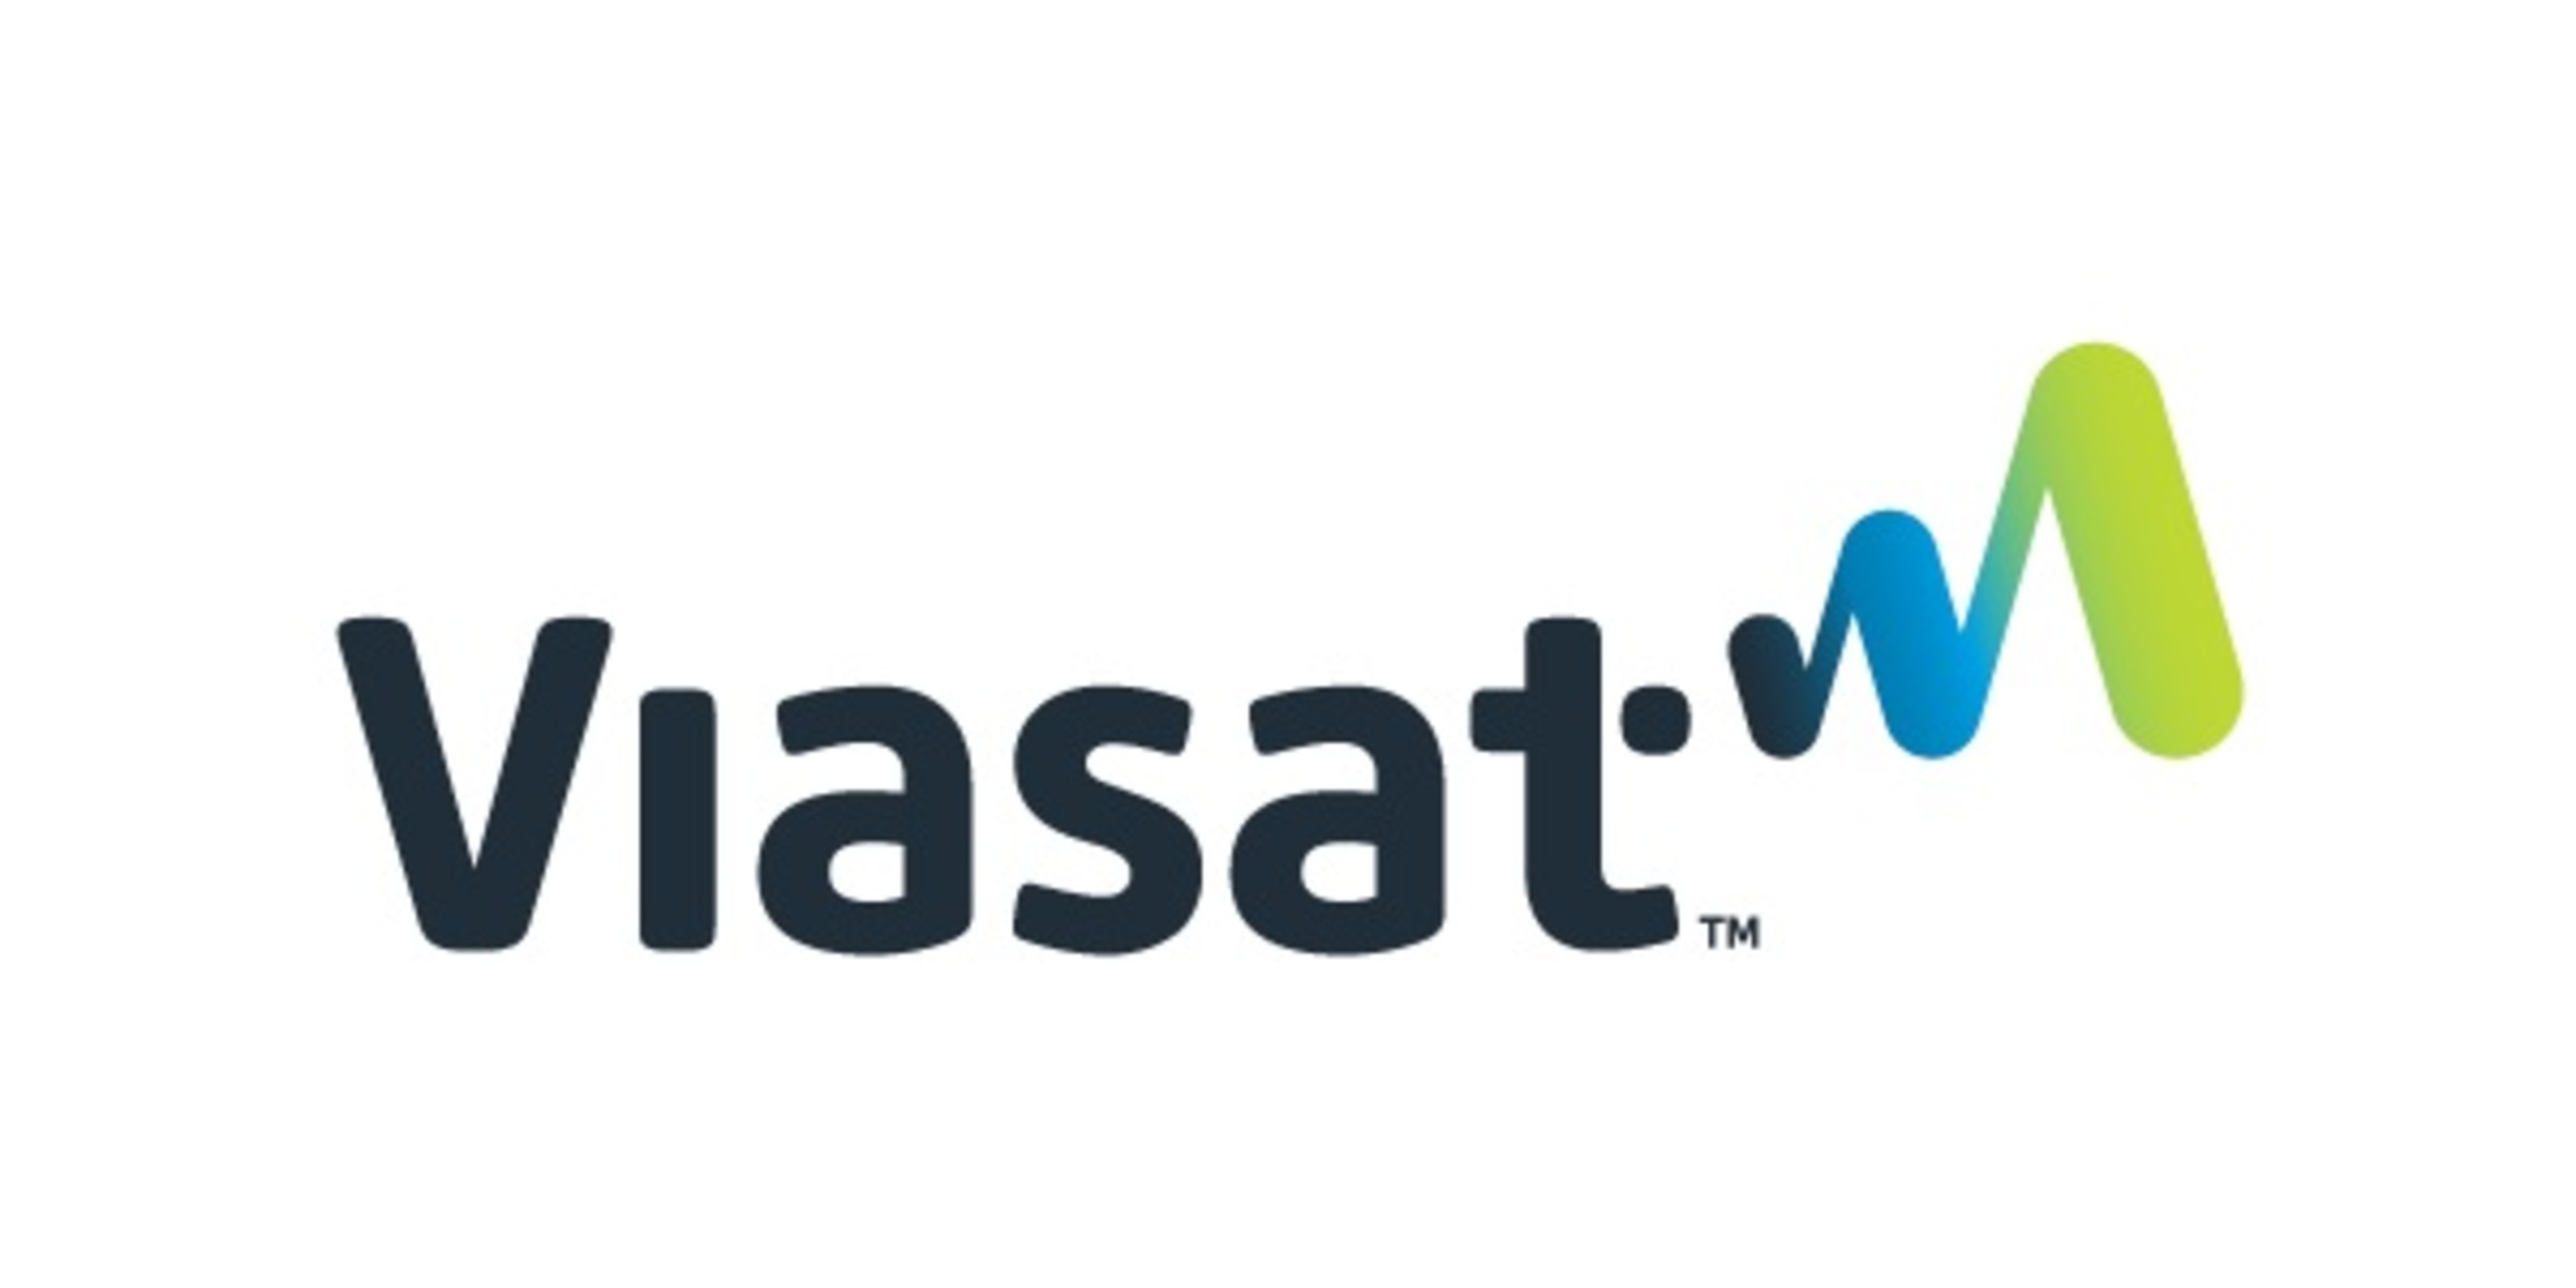 ViaSat creates new ways to access advanced network applications with satellite and other wireless networking systems that enable fast, secure, and efficient communications to any location. The company provides networking products and services for enterprise and consumer IP applications; is a key supplier of network-centric military communications and encryption technologies to the U.S. government; and is the primary technology partner for gateway and customer premises equipment for consumer and mobile satellite broadband services. Other products and services include communication system design, satellite antenna systems, integrated circuits, and network acceleration. The company also owns WildBlue, the premier Ka-band satellite broadband service.